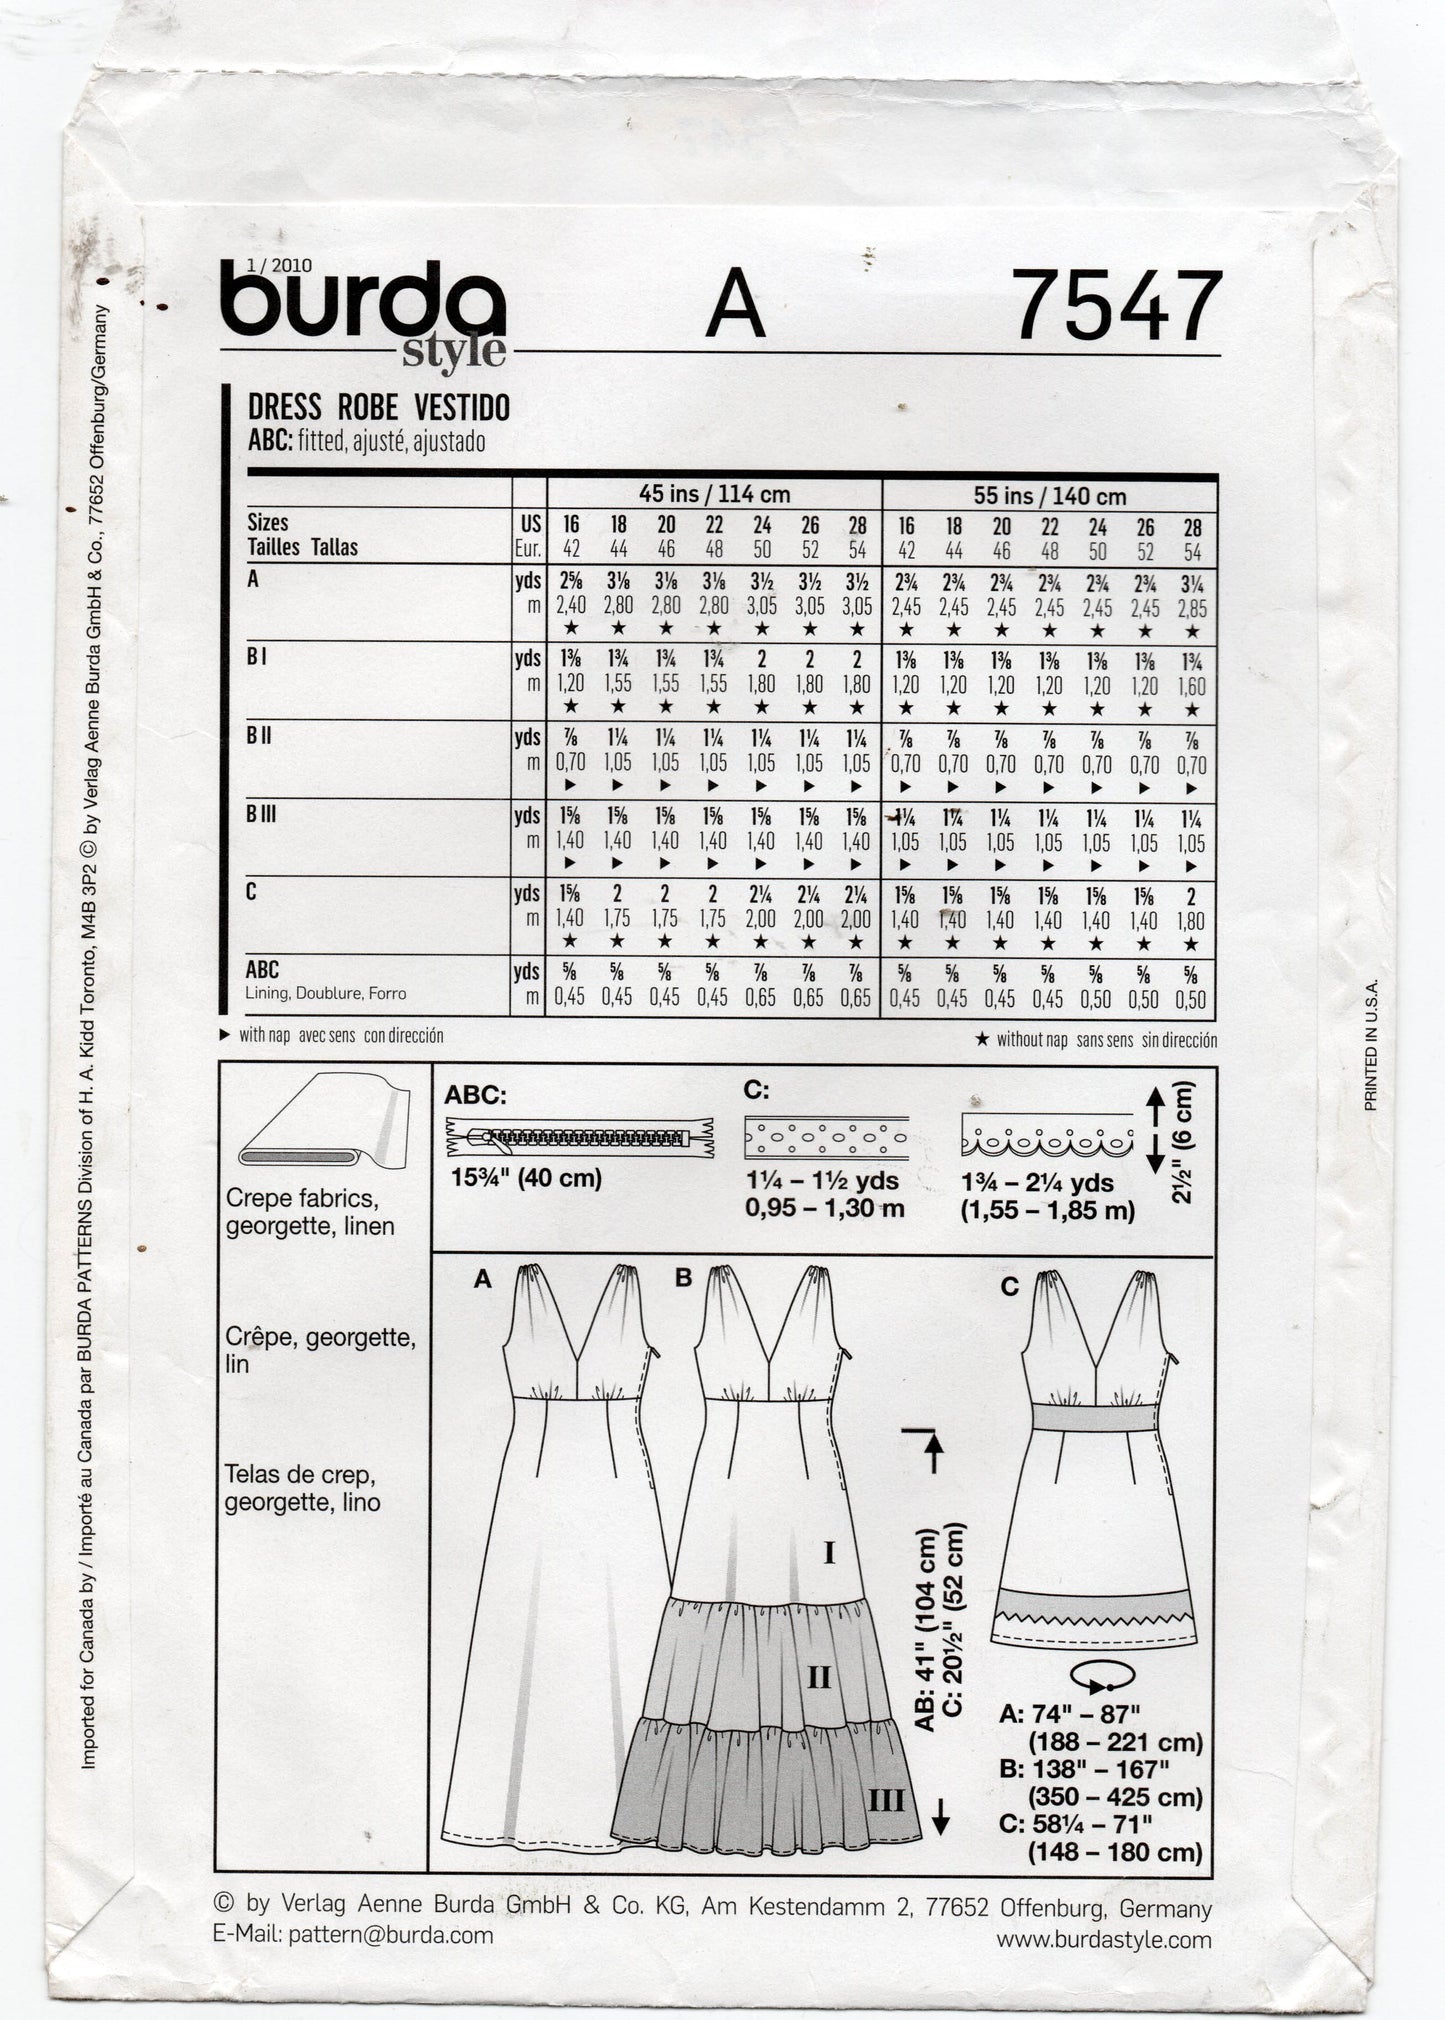 Burda 7547 Womens Plus Sized Tiered Sundresses Out Of Print Sewing Pattern Sizes 16 - 28 UNCUT Factory Folded